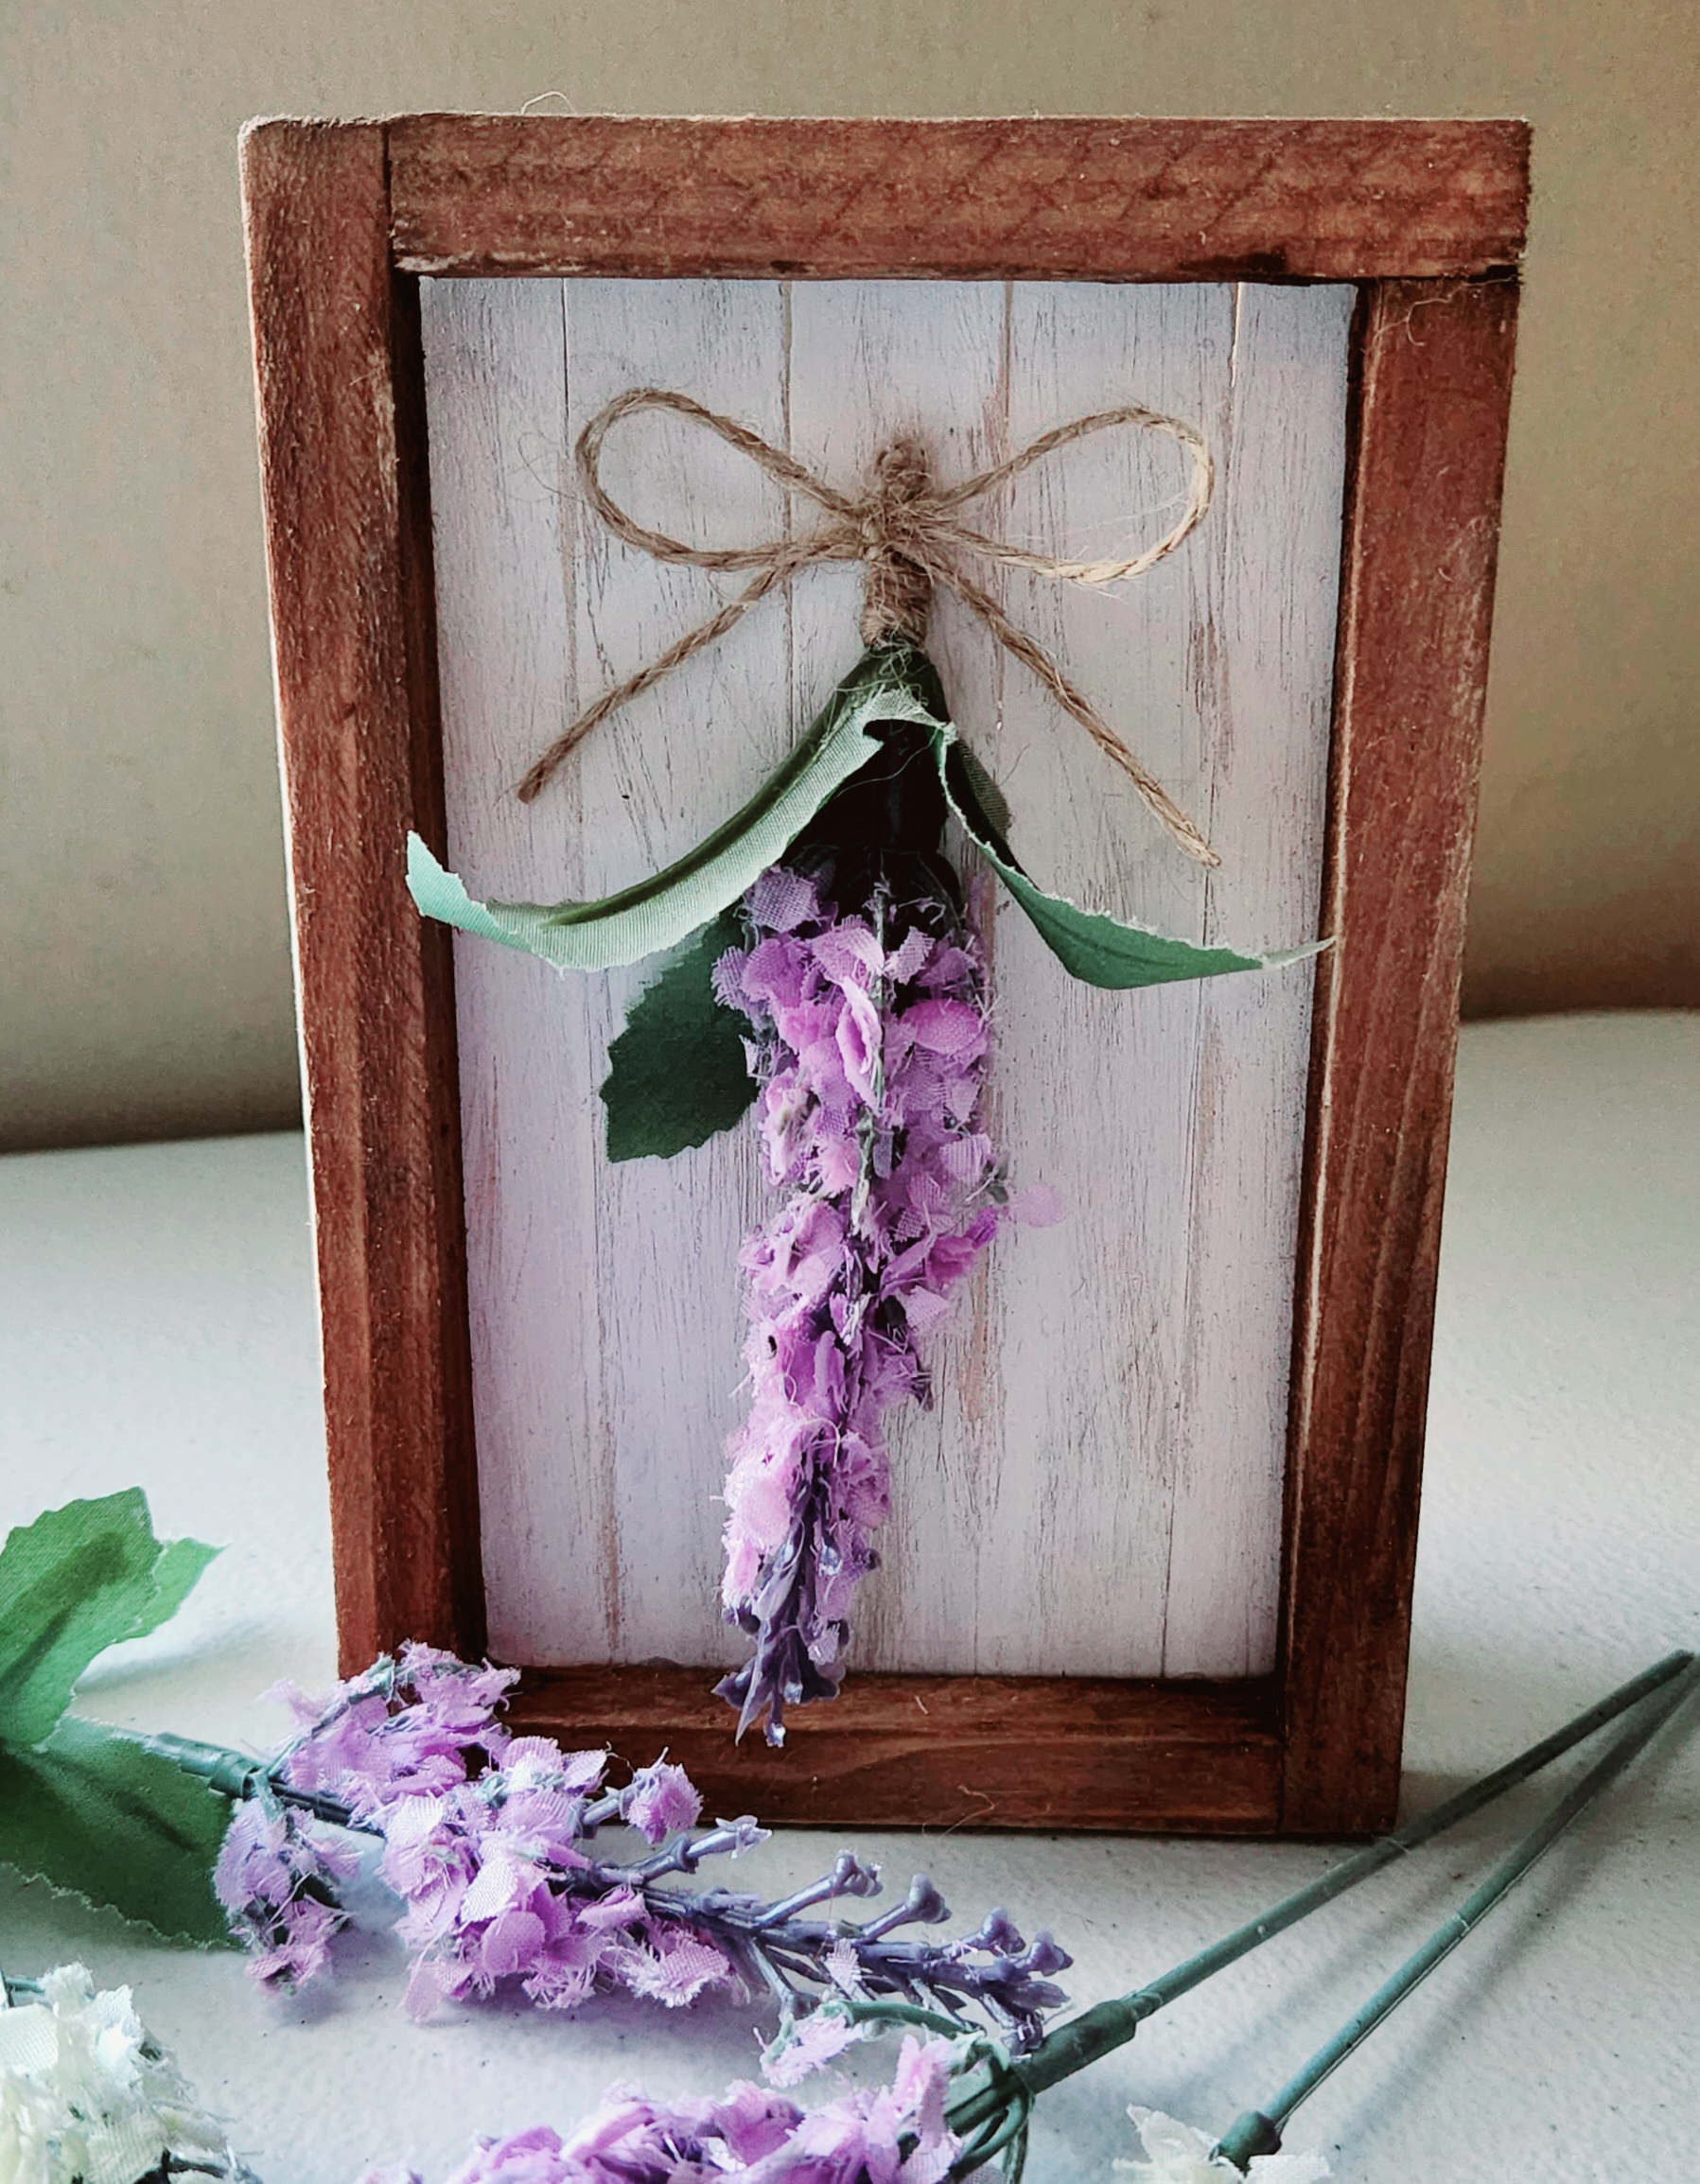 Dollar Tree canvas DIY shiplap project: white shiplap looking popsicle sticks glued inside the wood frame of a Dollar Tree canvas with a lavender flower and twine bow glued in the center.